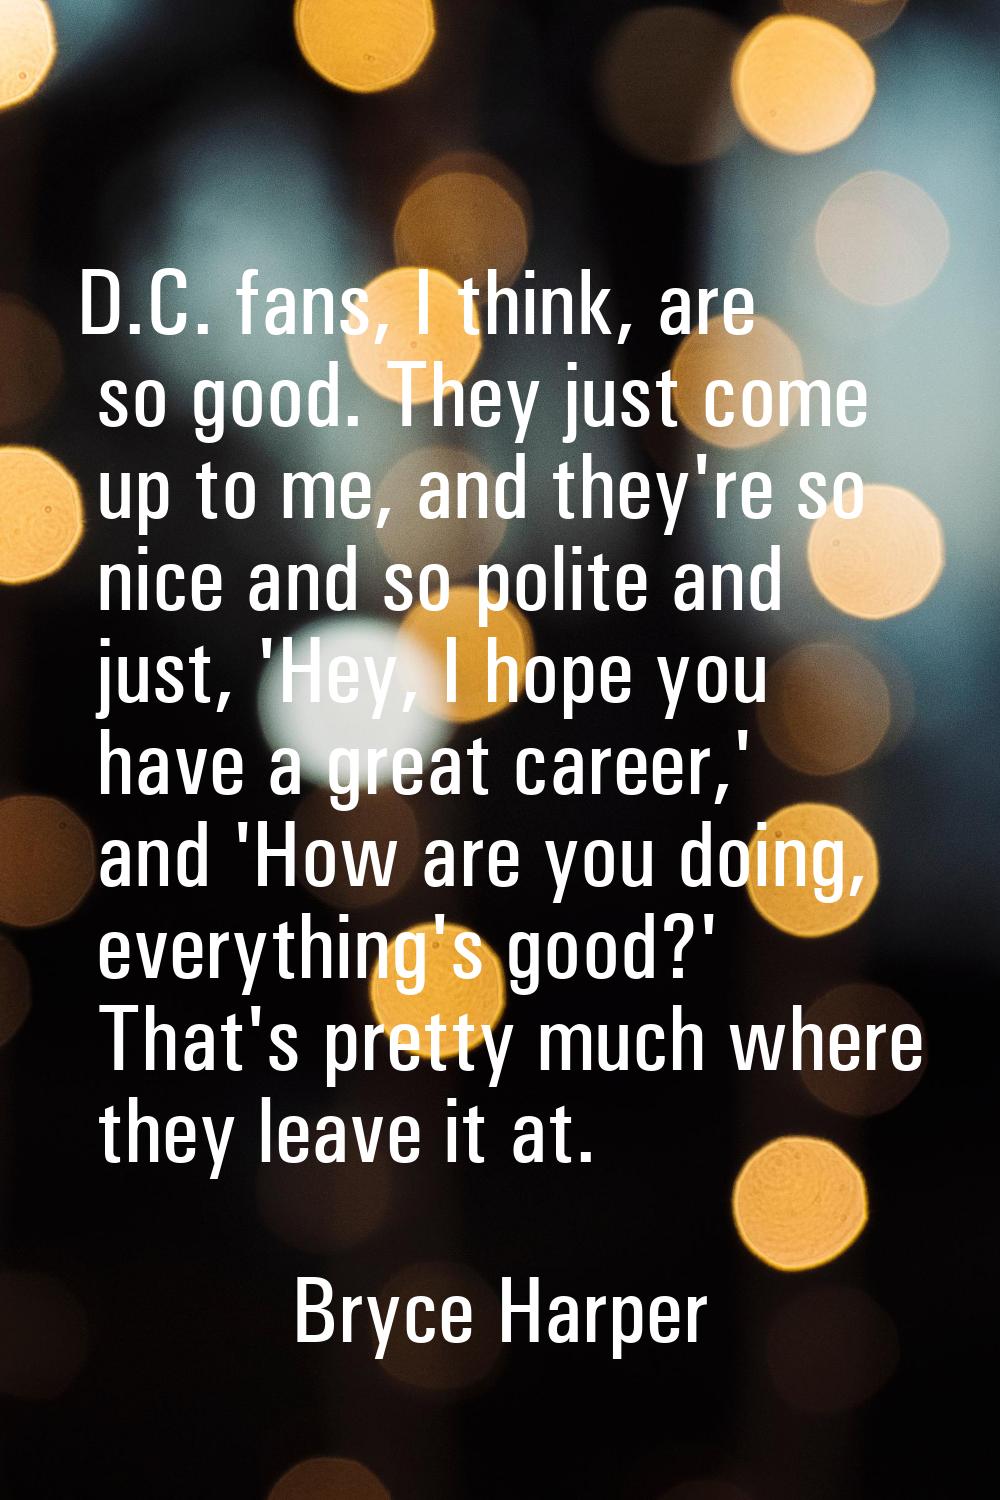 D.C. fans, I think, are so good. They just come up to me, and they're so nice and so polite and jus